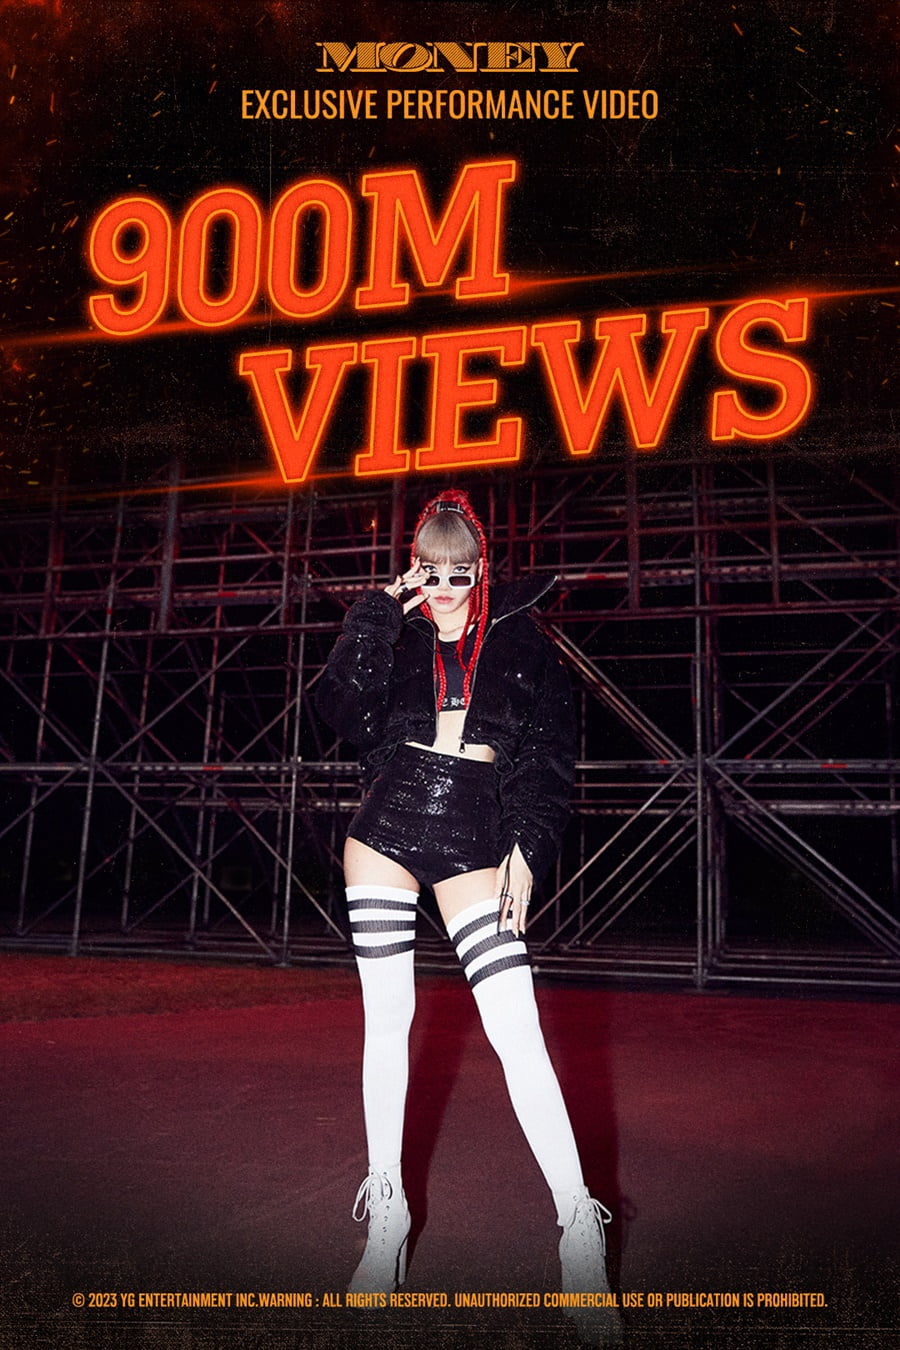 Lisa's solo song 'MONEY' performance video exceeds 900 million views